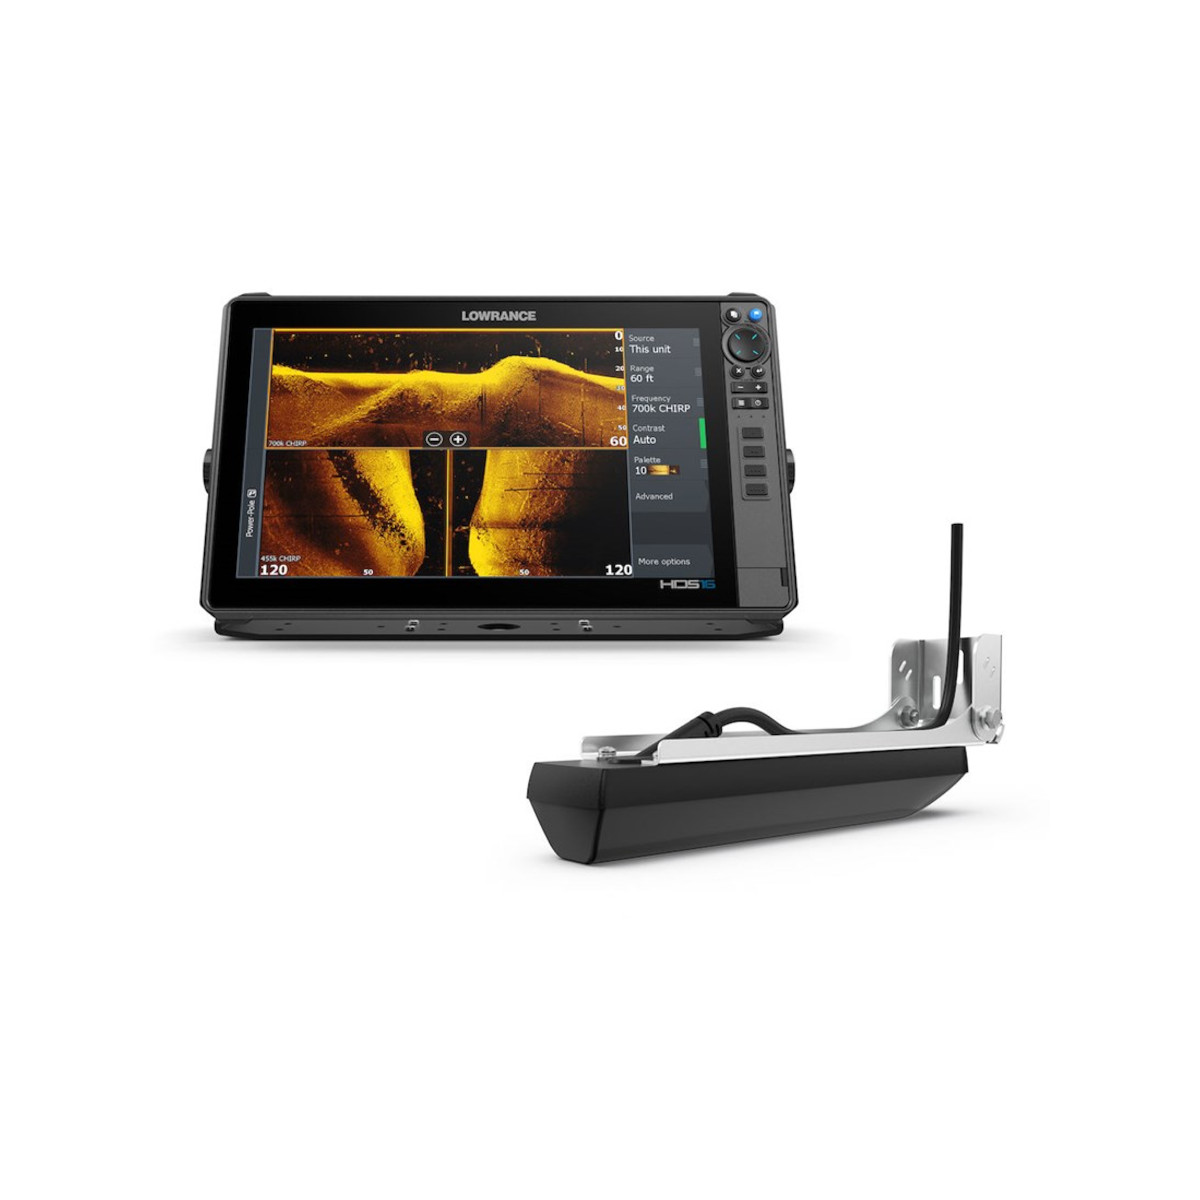 Lowrance HDS Pro 9 kaartplotter met touch-display incl. Active Imaging HD transducer